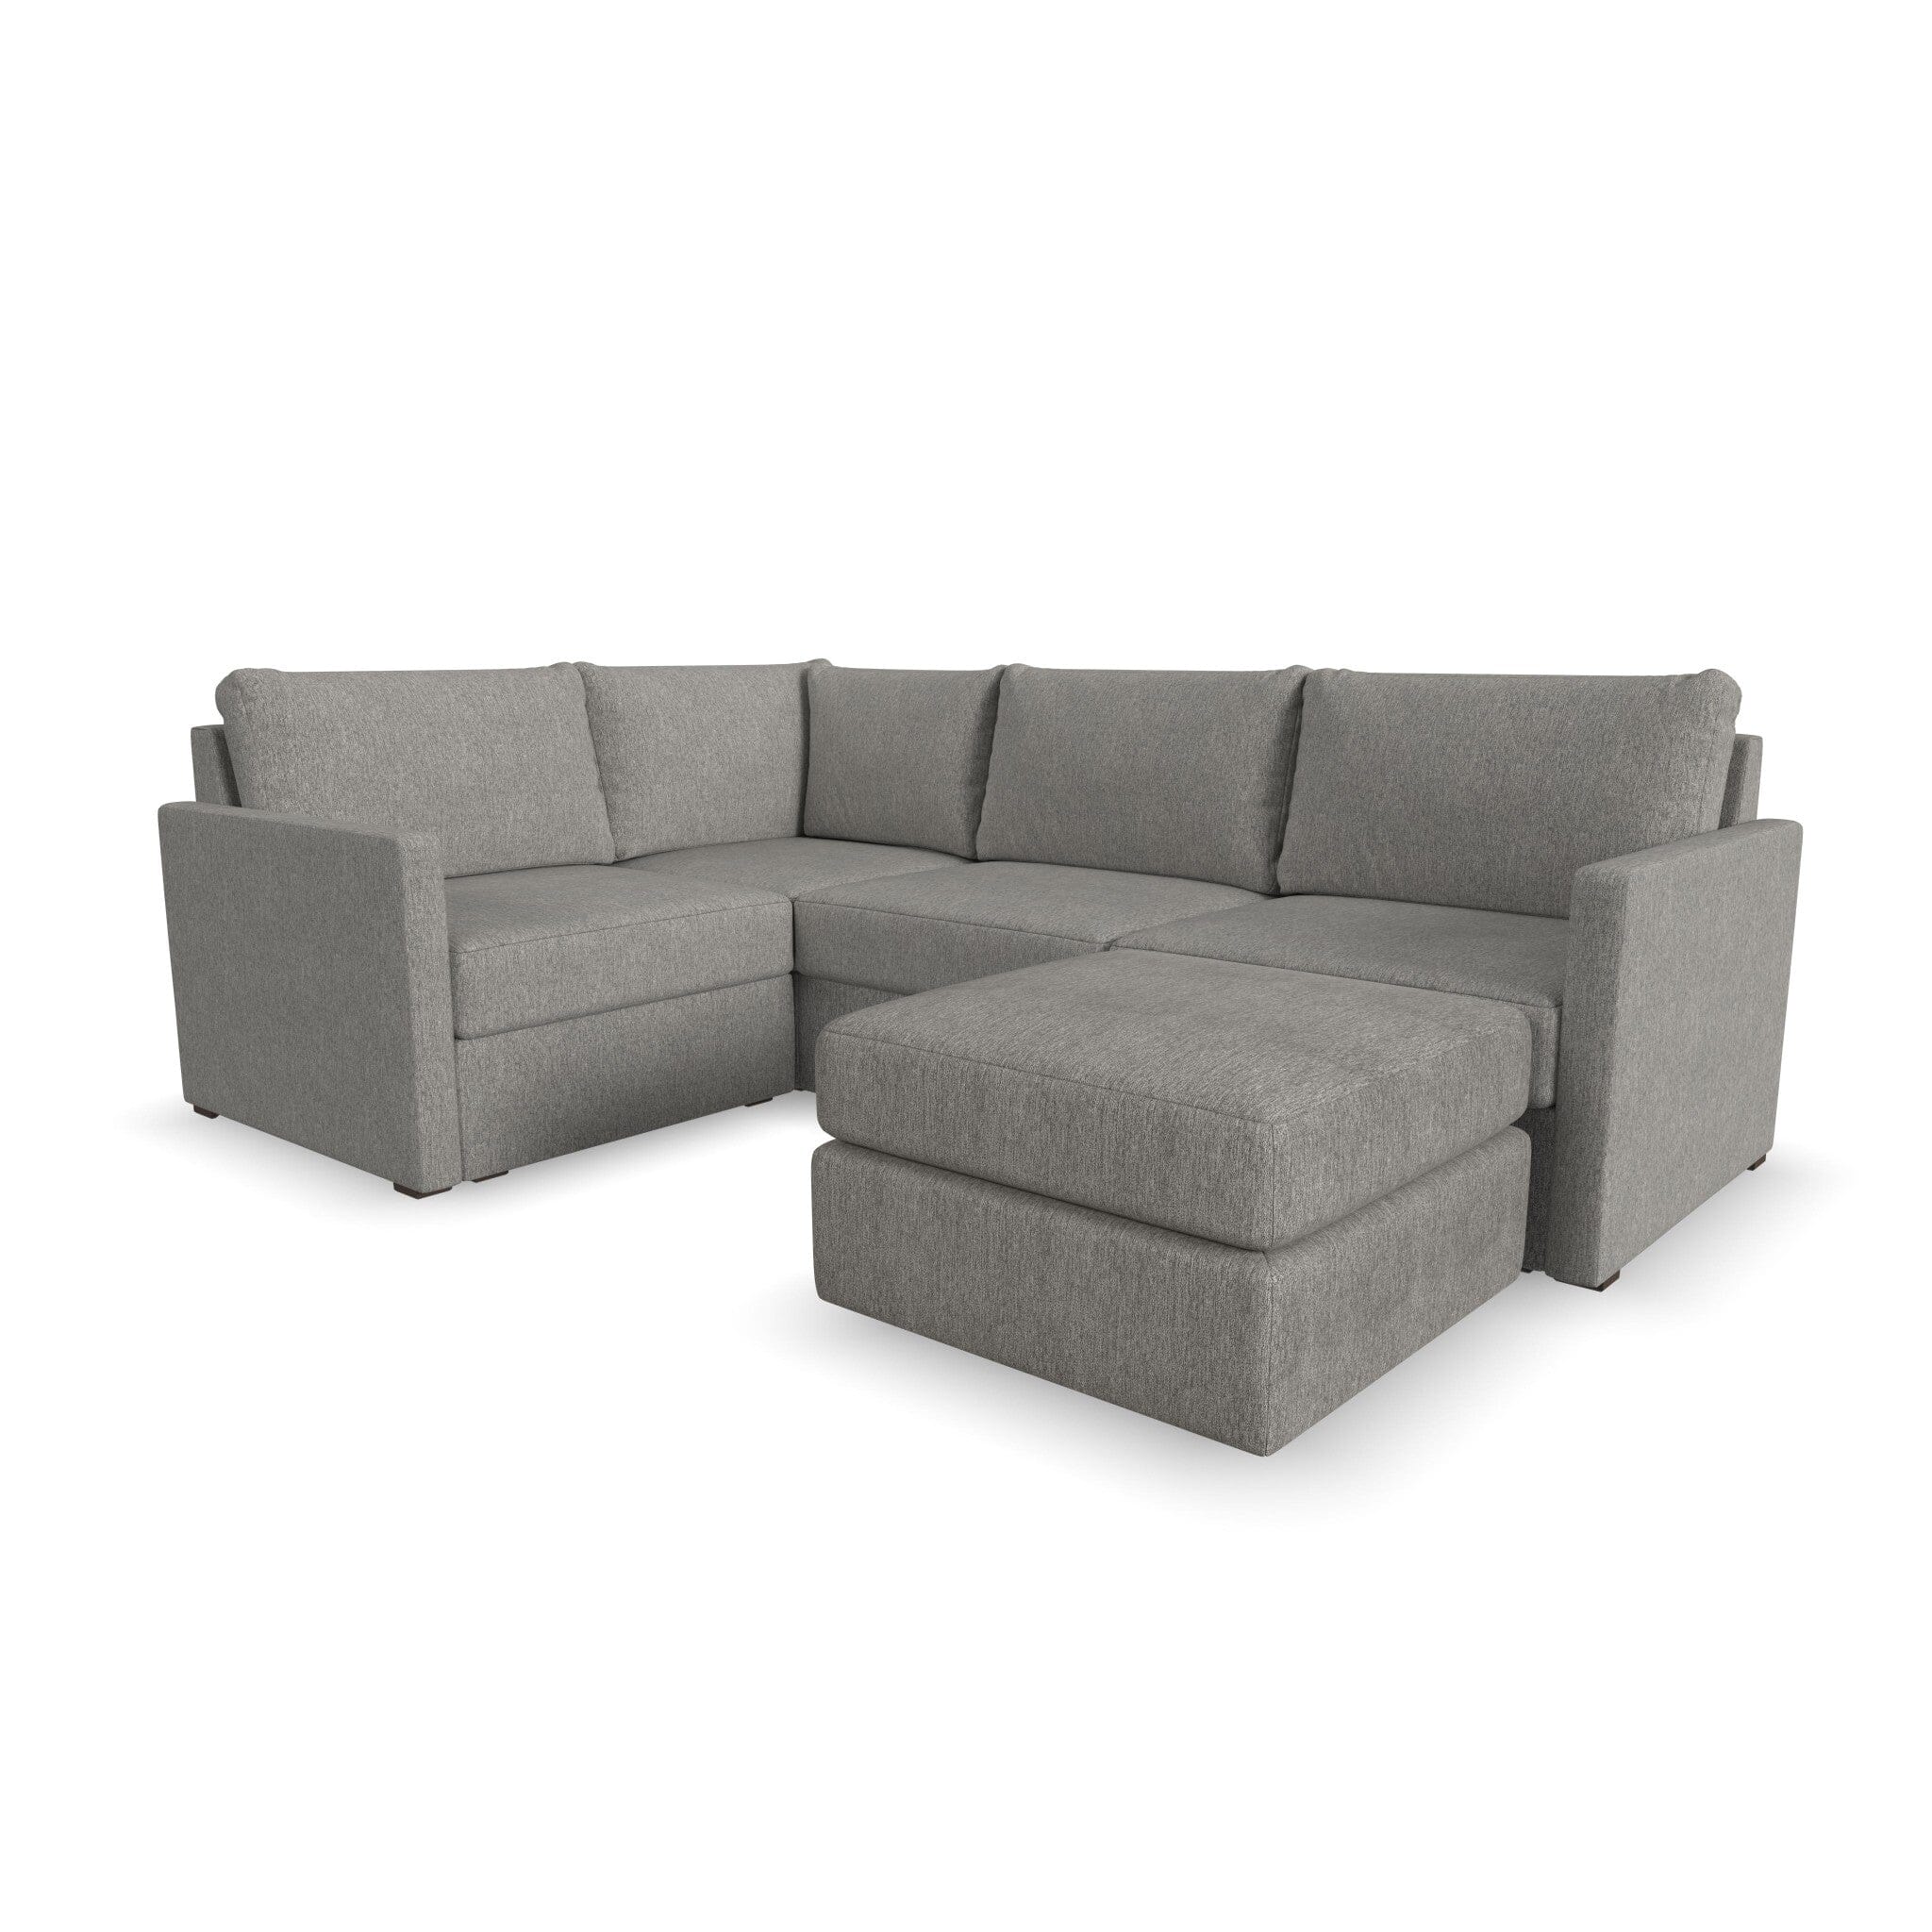 Traditional 4-Seat Sectional with Narrow Arm and Ottoman By Flex Sectional Flex